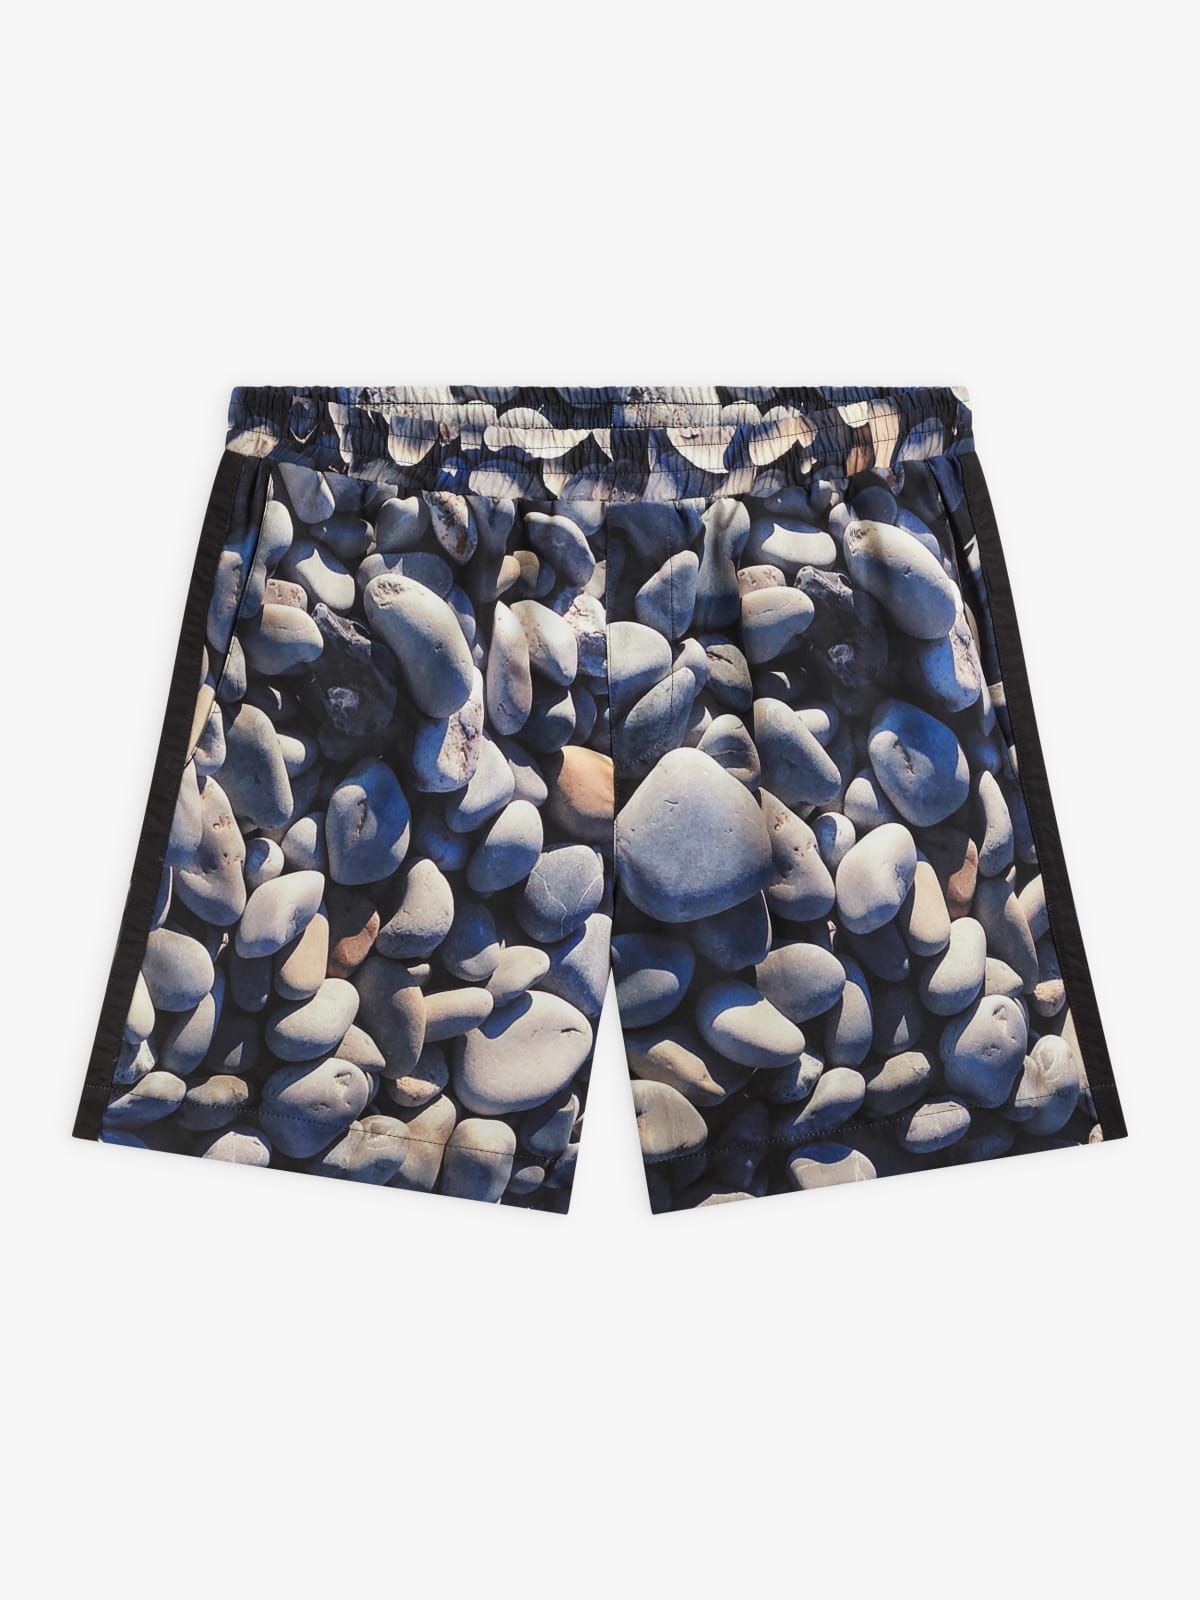 swimming trunks with digital "cailloux" (pebbles) print